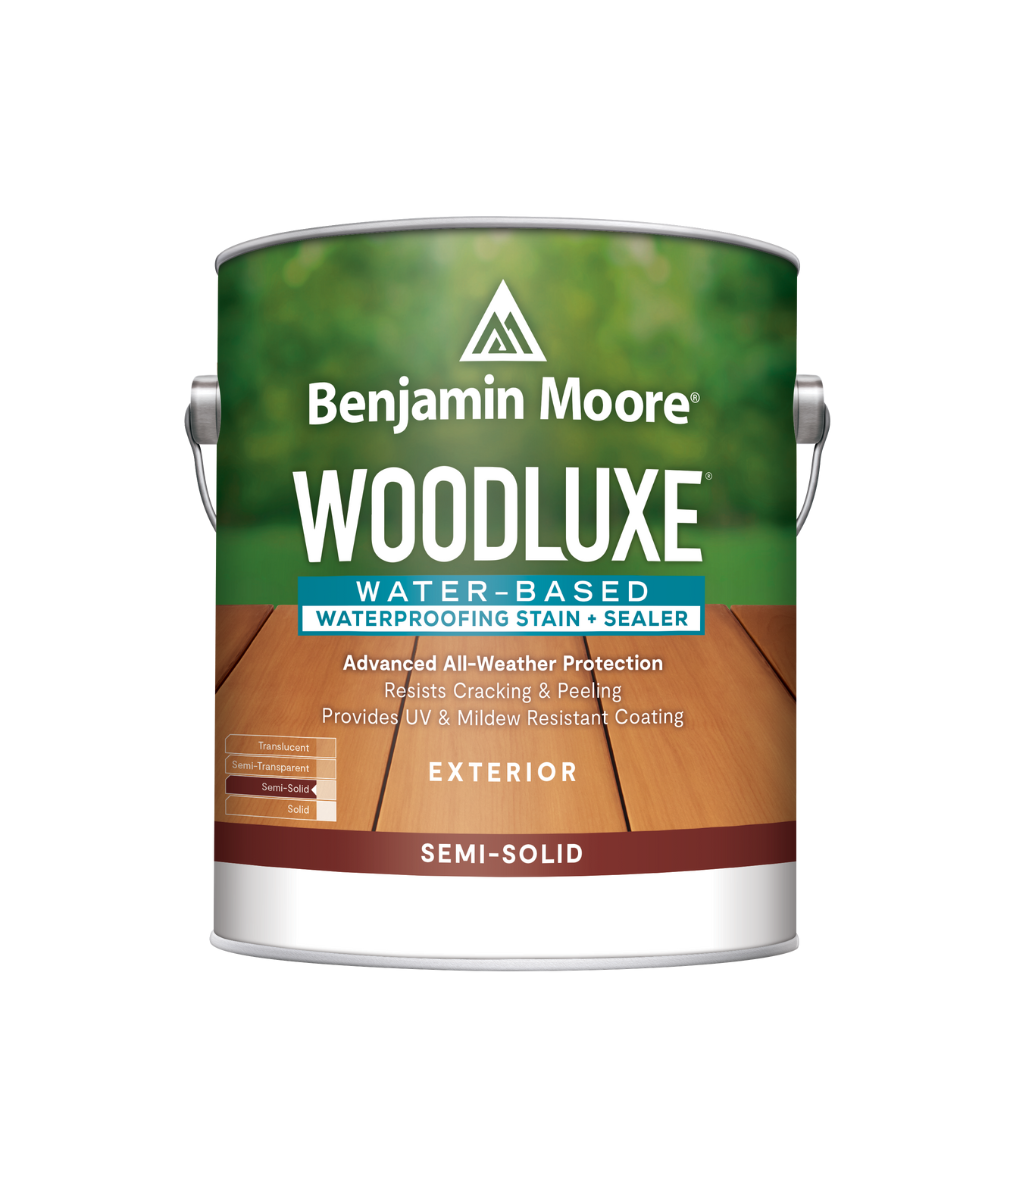 Benjamin Moore Woodluxe® Water-Based Semi-Solid Exterior Stain available to shop at Wallauers.